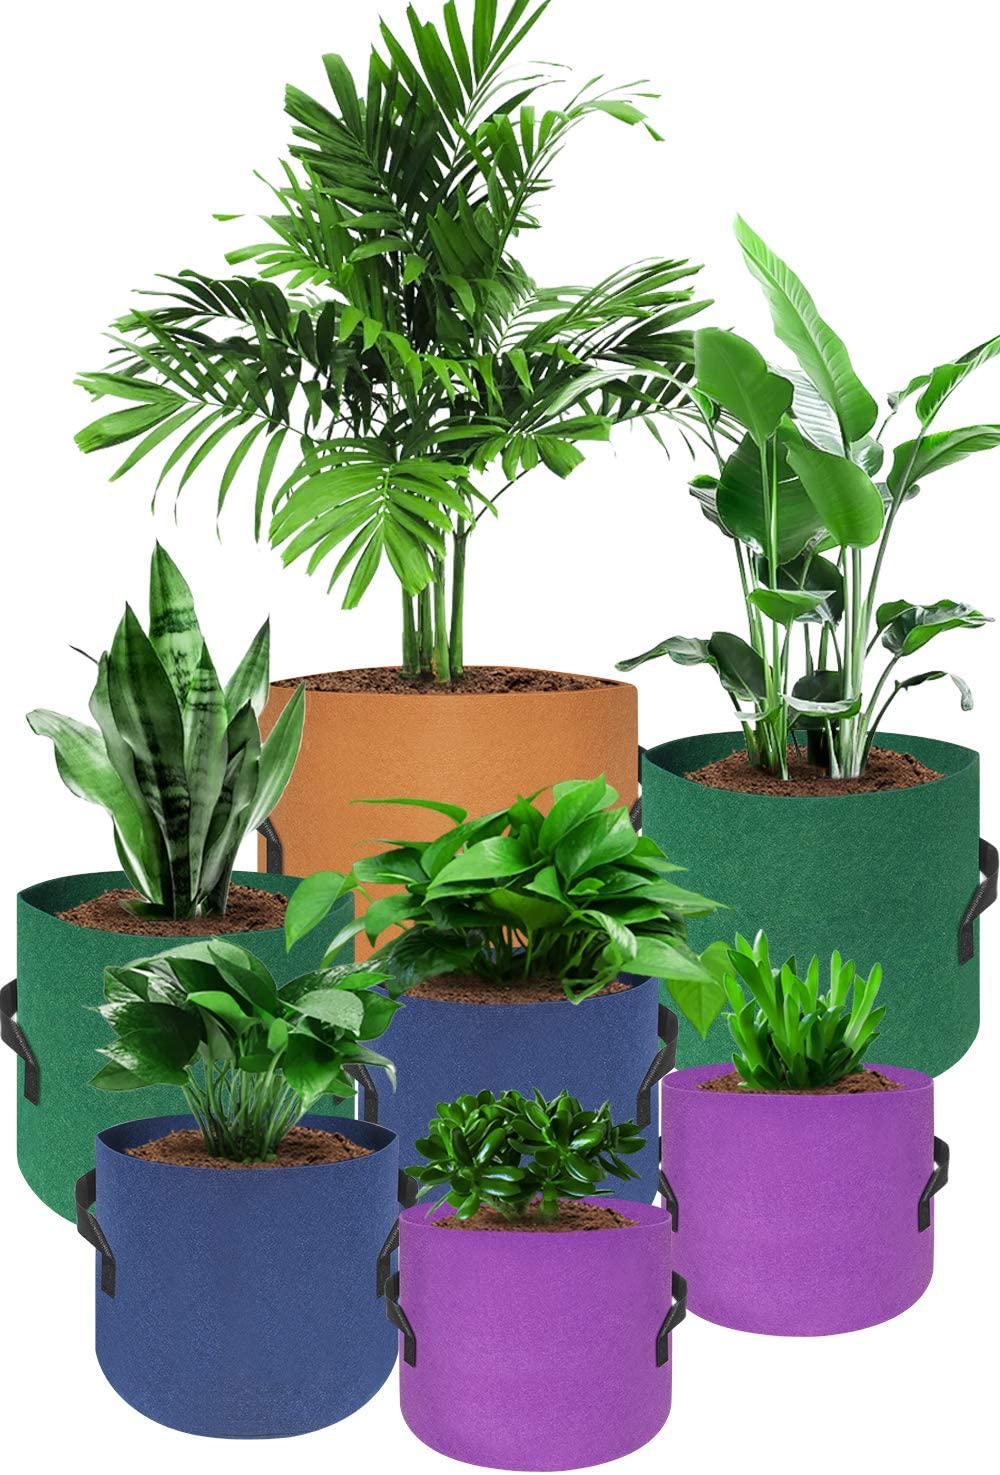 HAOWIN Colorful Plant Grow Bags 7-Pack